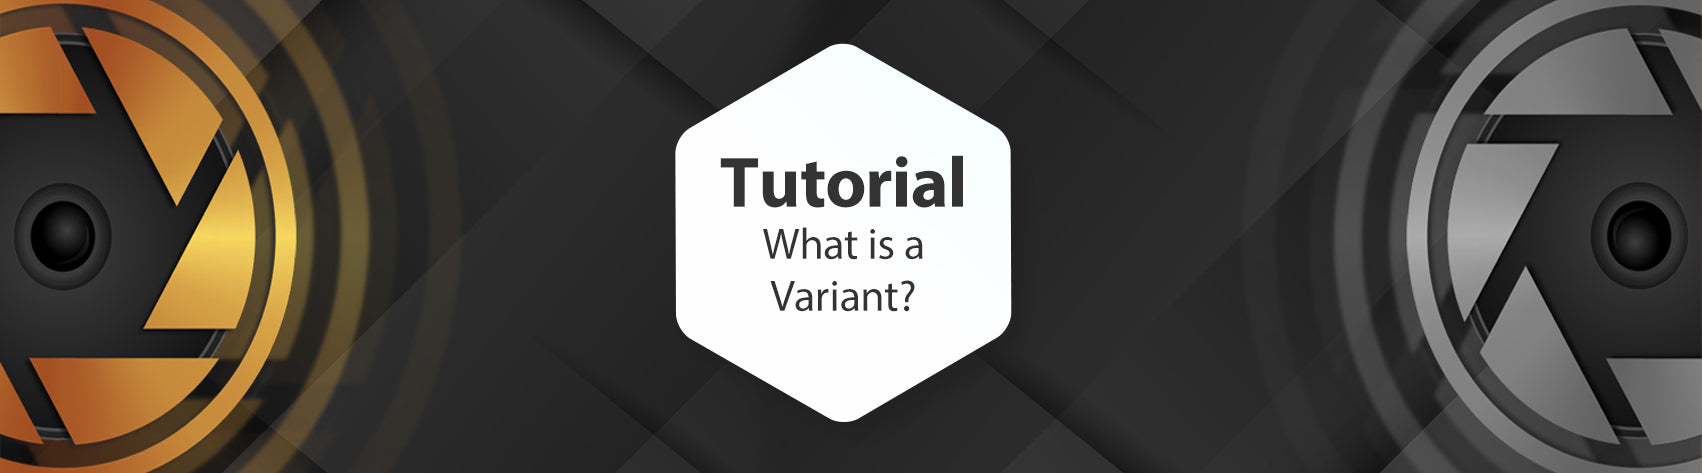 Tutorial - What is a Variant?